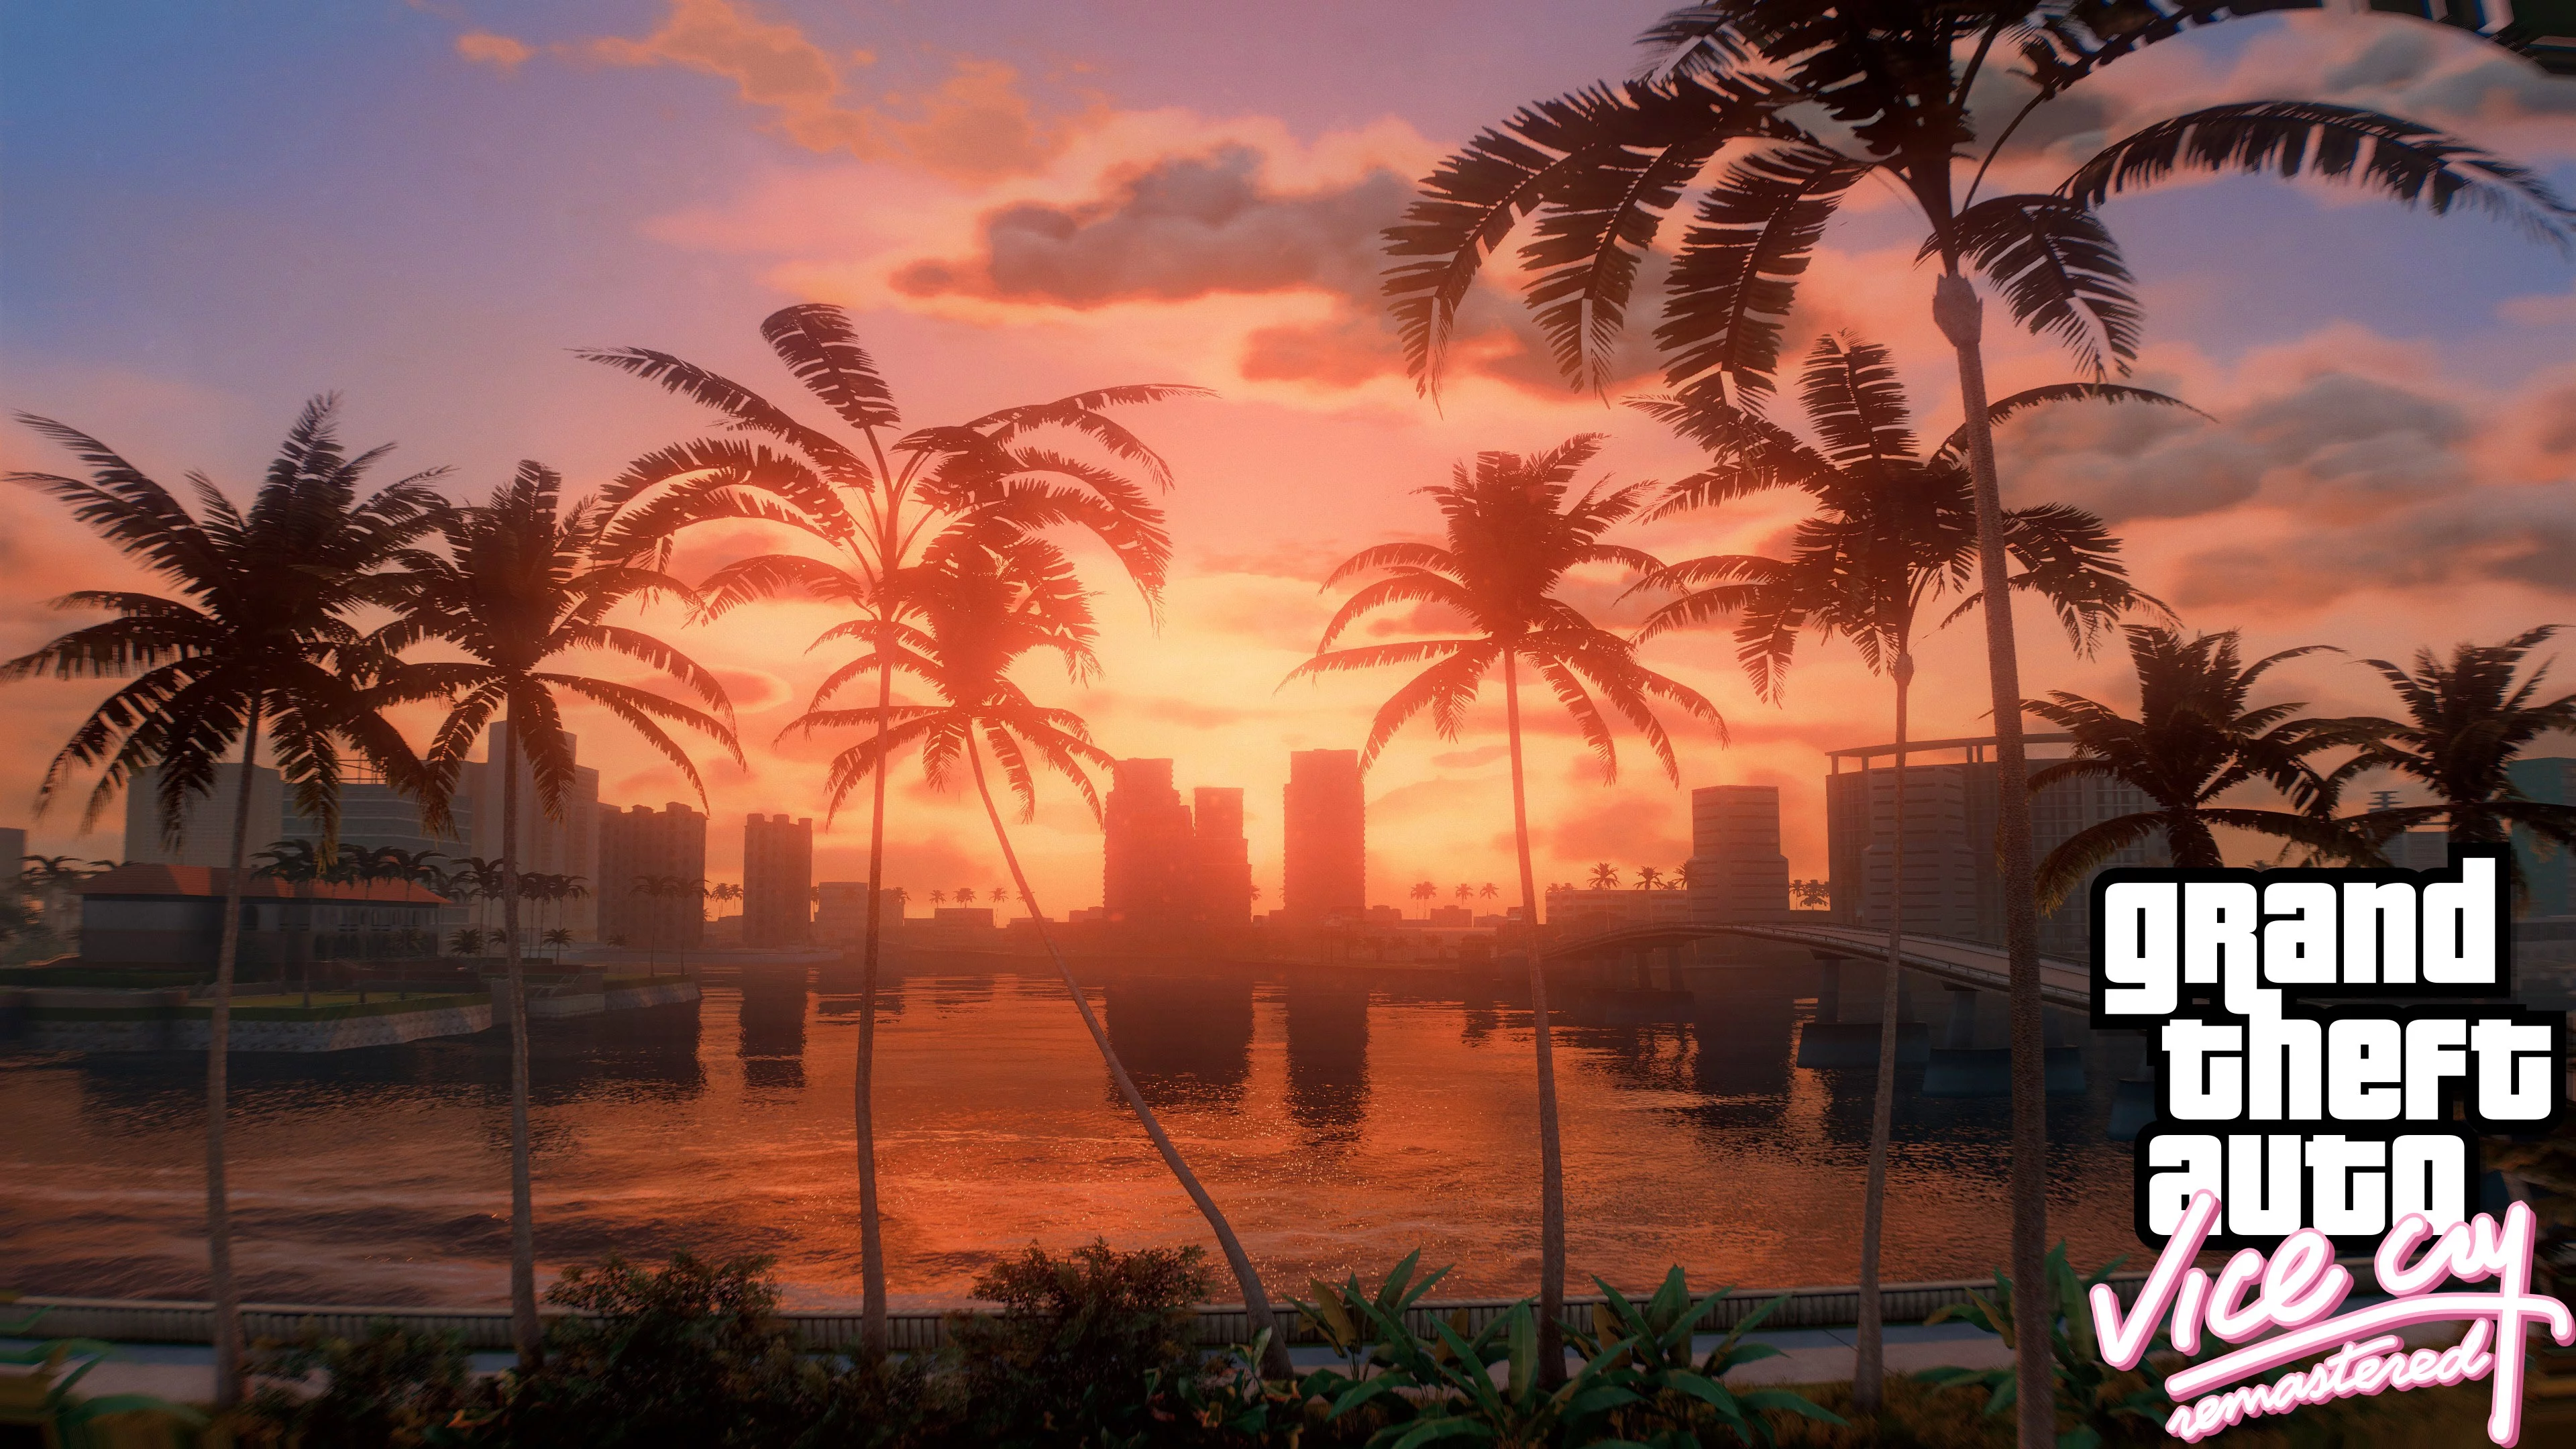 Grand Theft Auto V Vice City Remastered mod offers custom missions